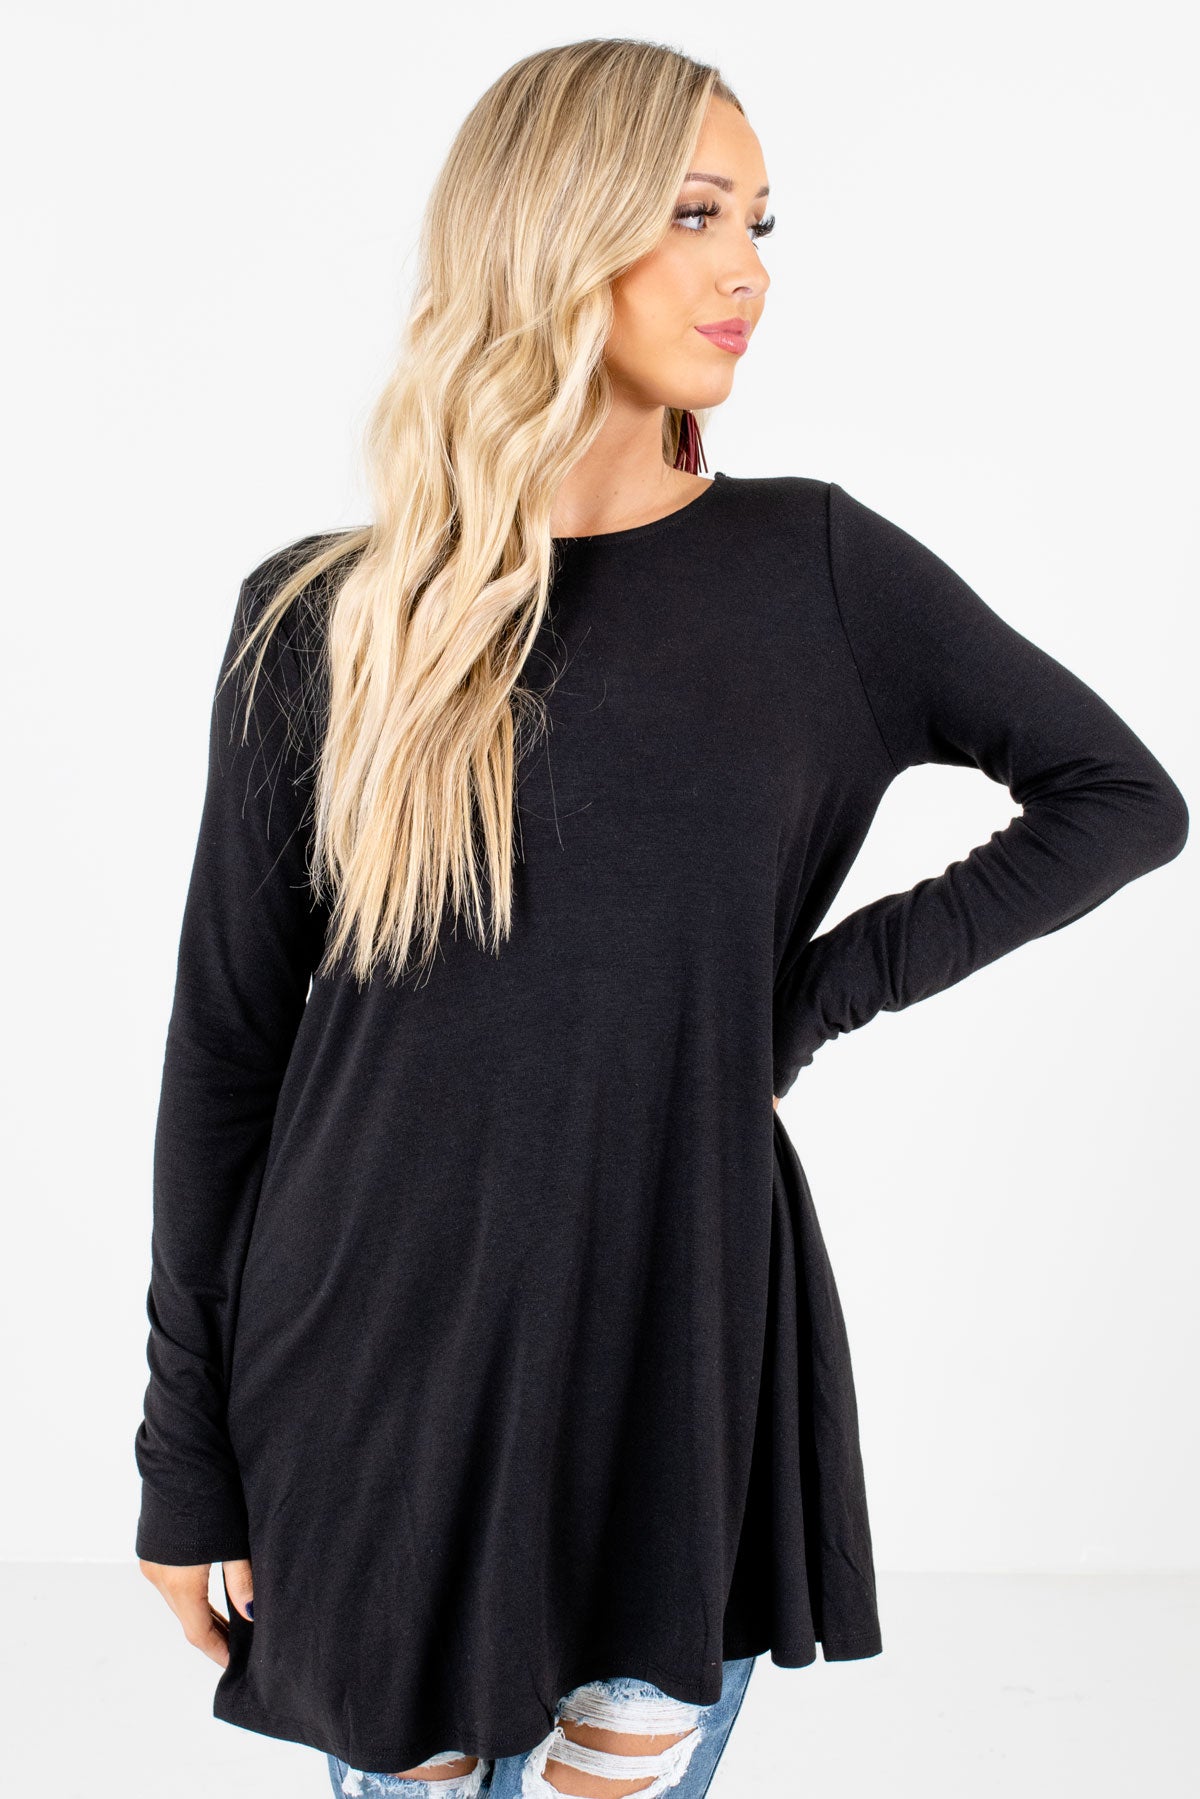 Women's Black Soft High-Quality Material Boutique Tops